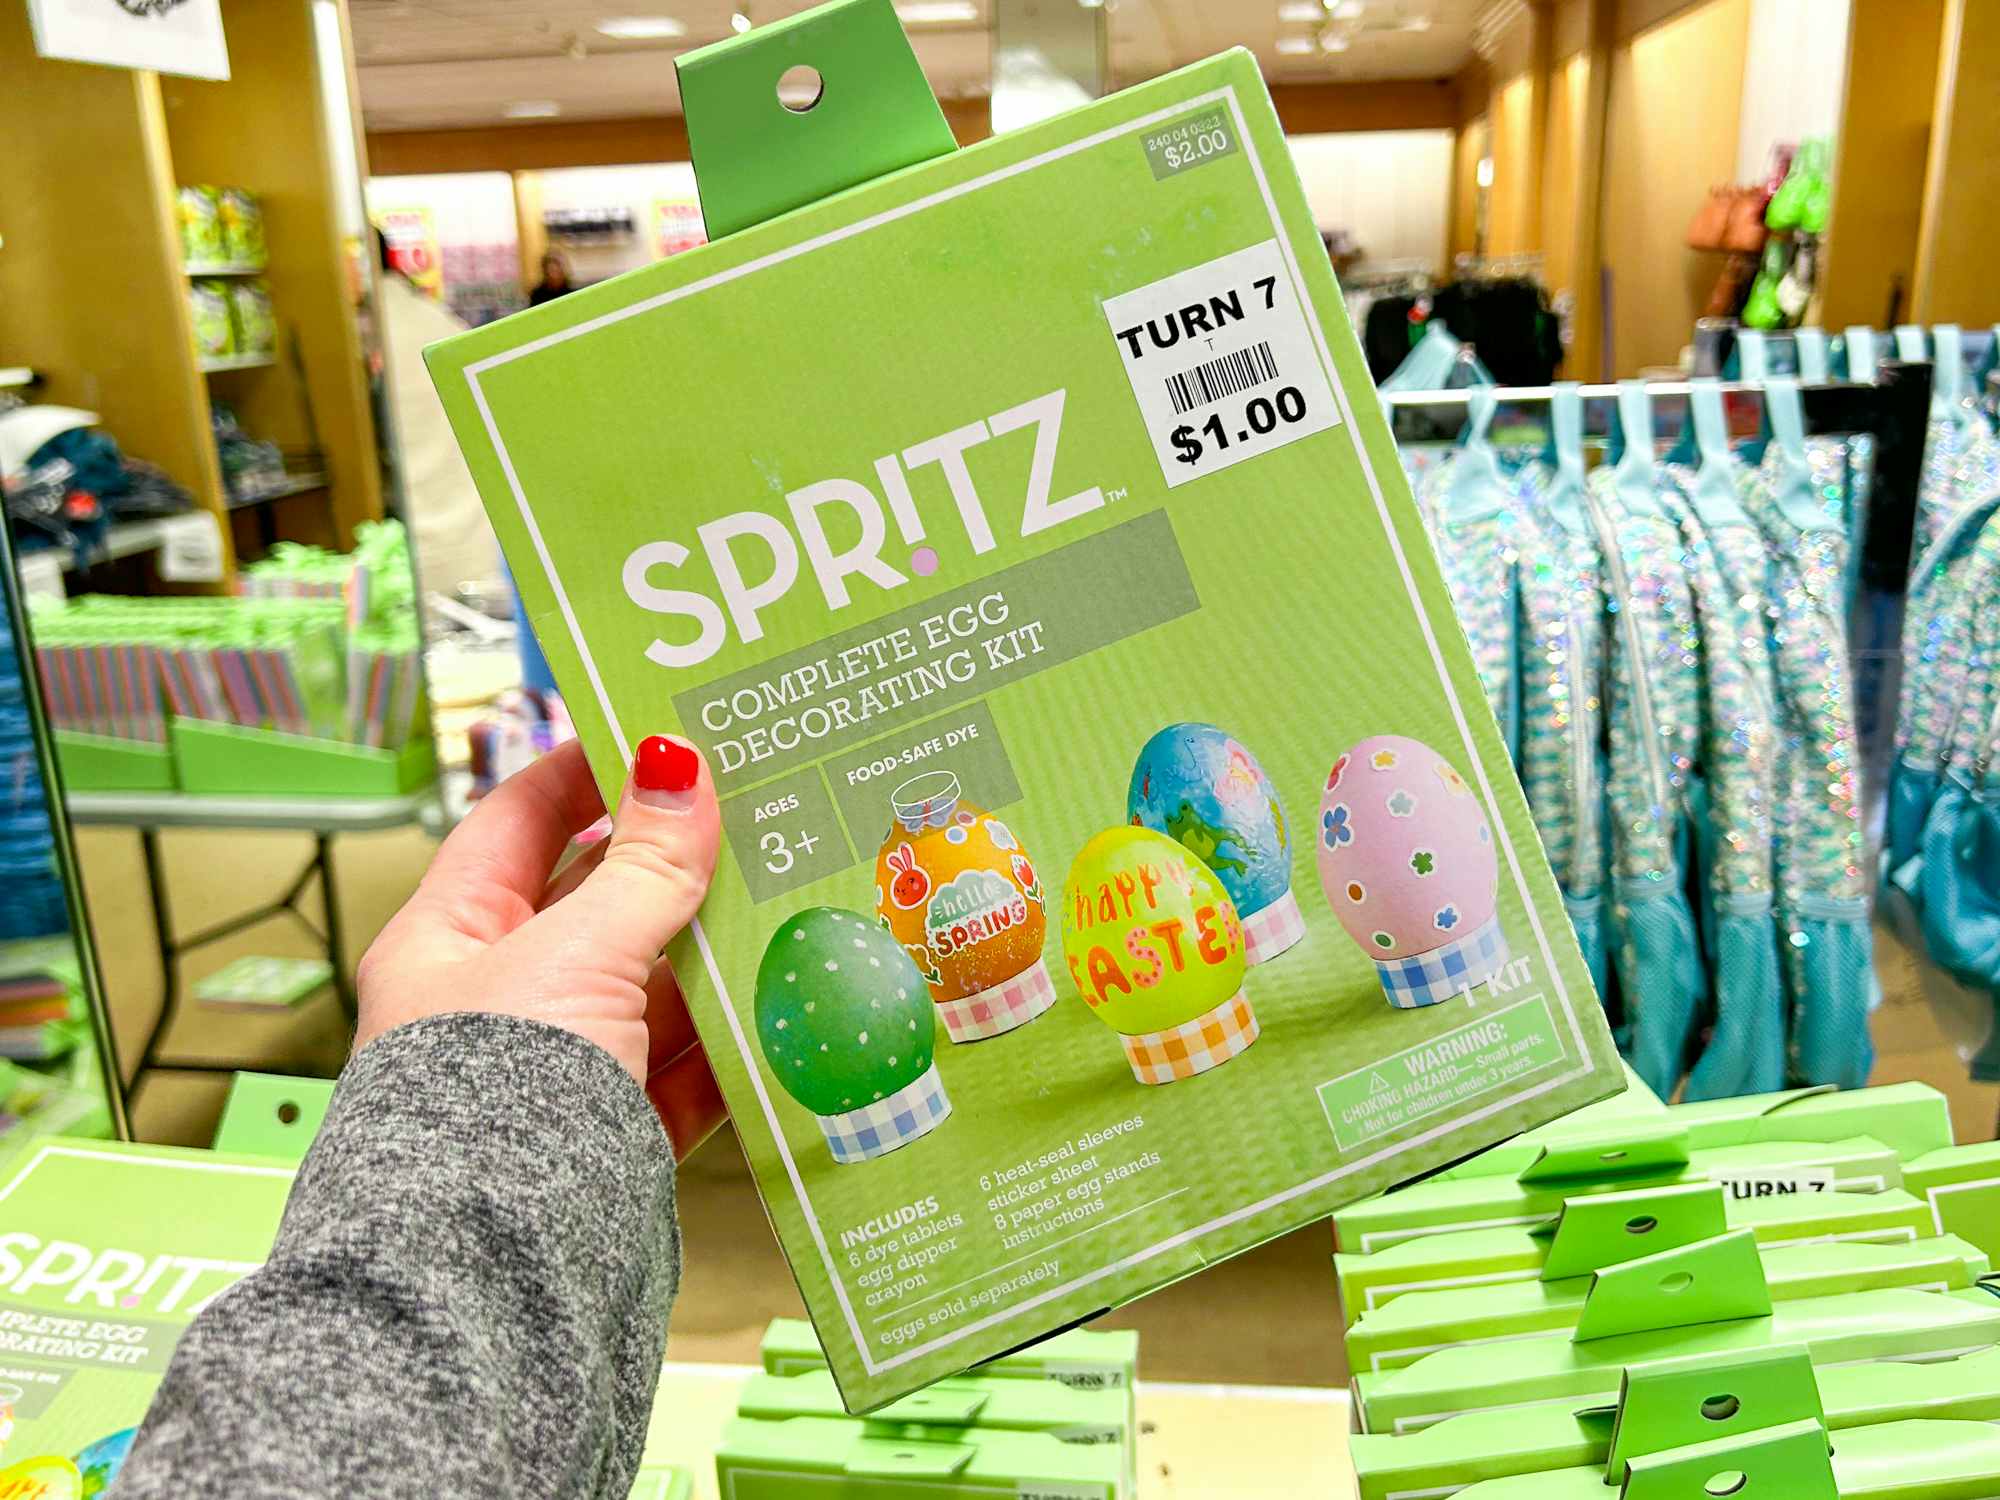 Someone holding a Spritz complete egg decorating kit inside a Turn7 store